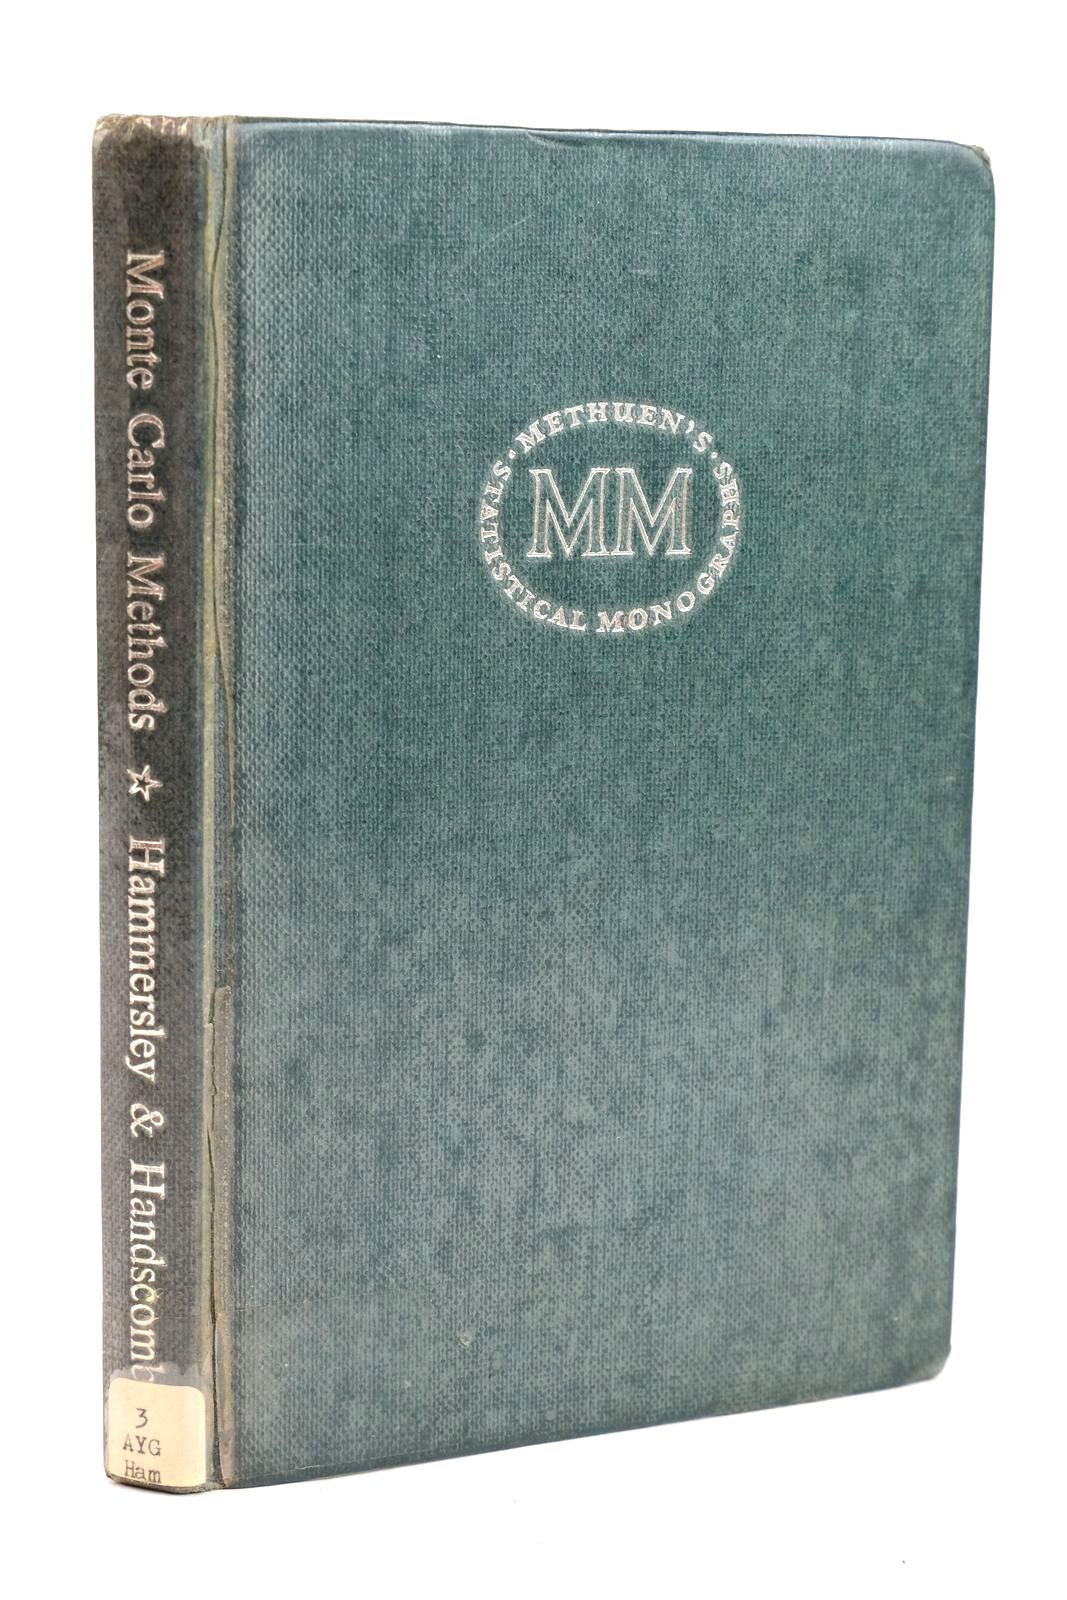 Photo of MONTE CARLO METHODS written by Hammersley, J.M.
Handscomb, D.C. published by Methuen & Co. Ltd. (STOCK CODE: 1319607)  for sale by Stella & Rose's Books